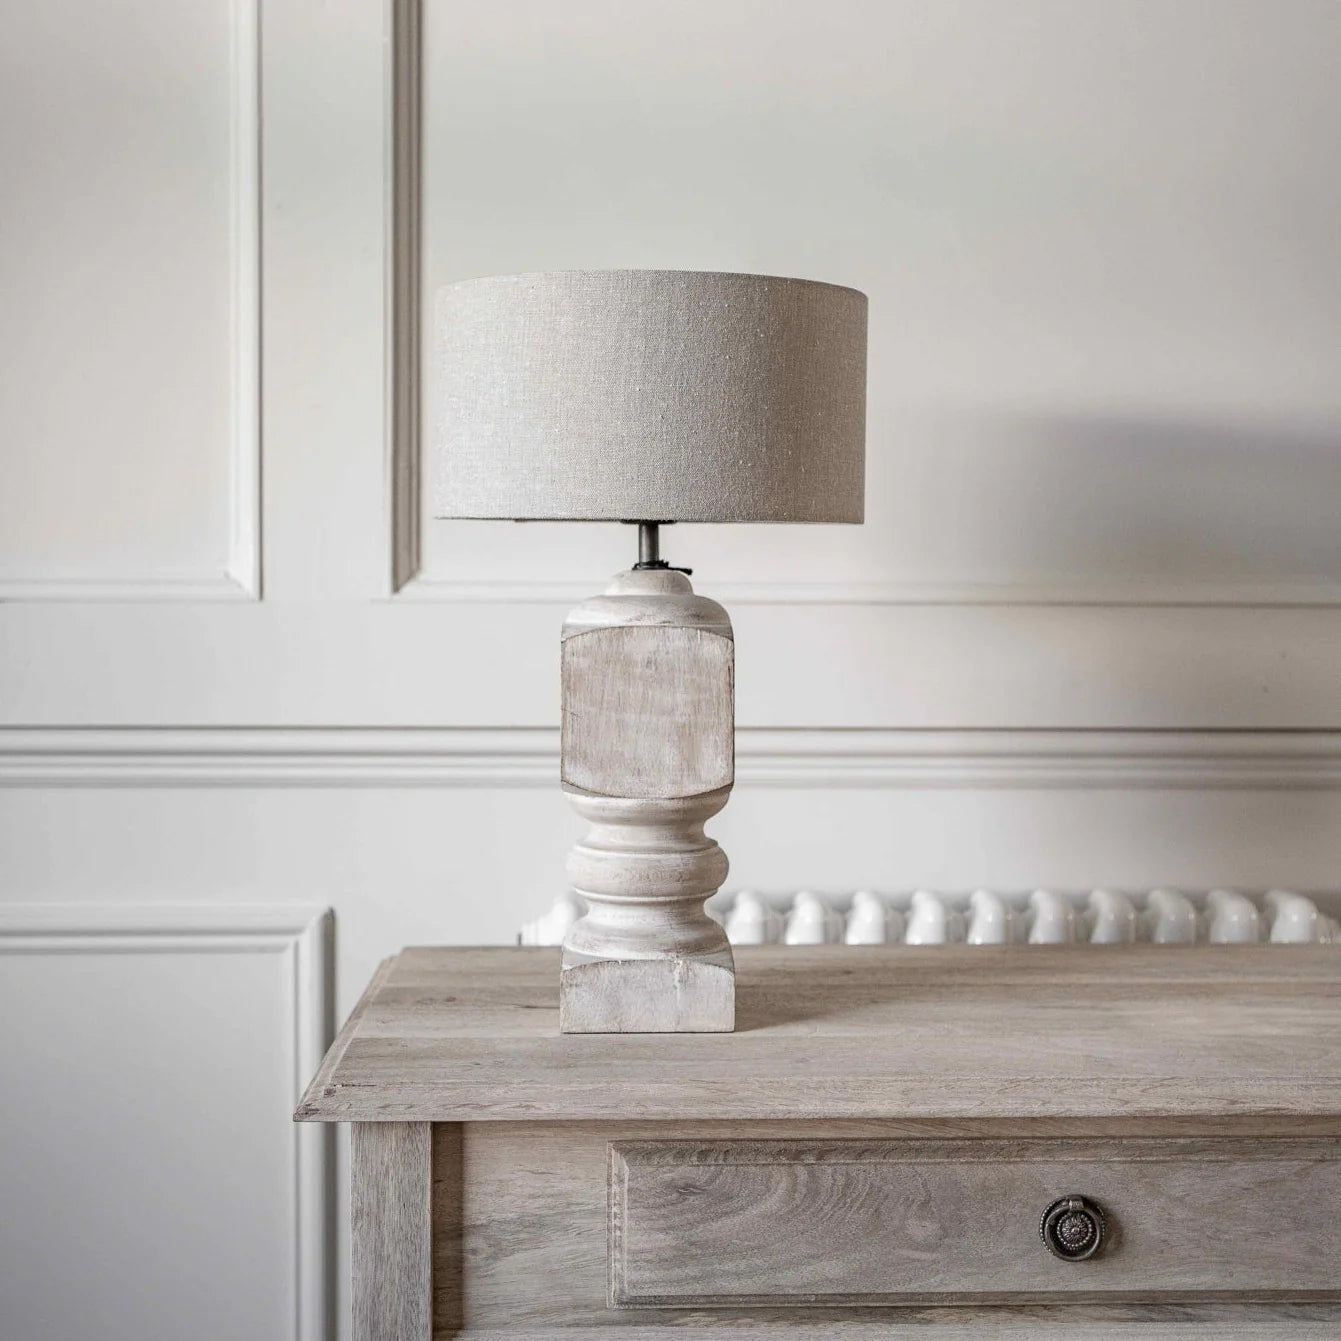 a white washed mango wood lamp on wooden table.